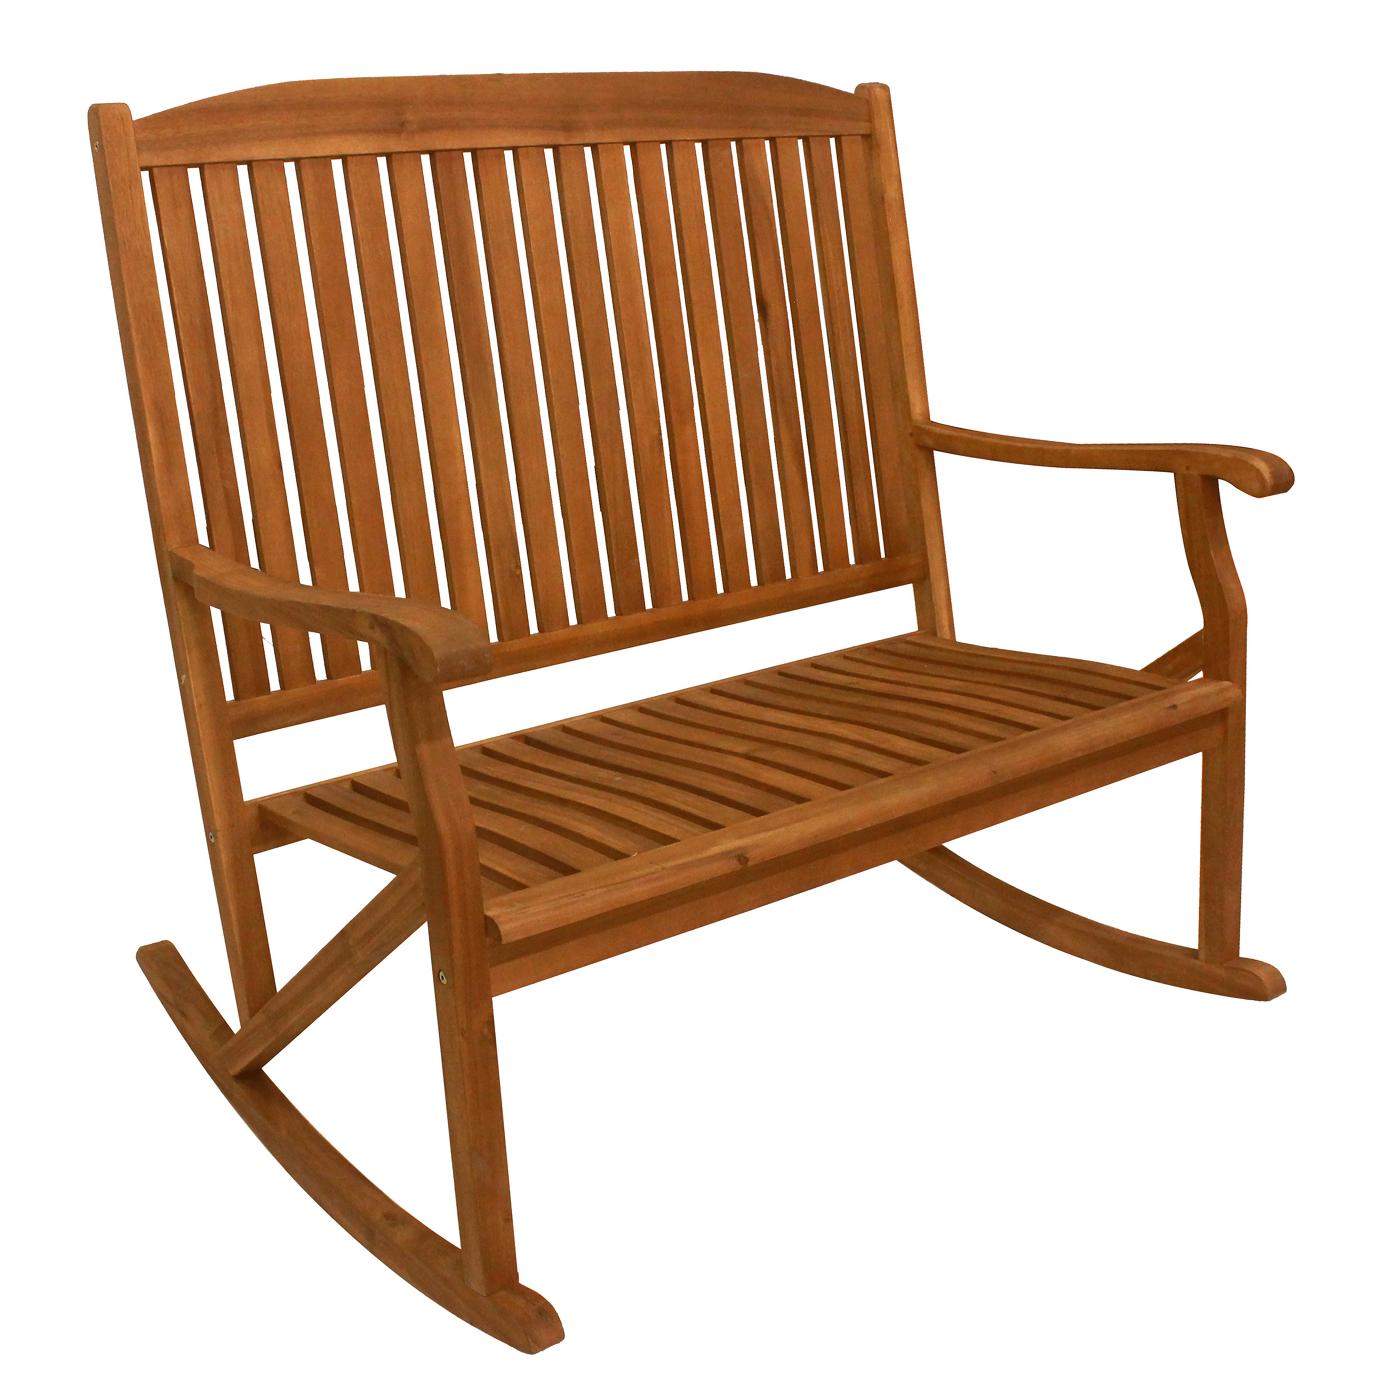 Leigh Country Sequoia Natural Rocker Bench; image 1 of 4